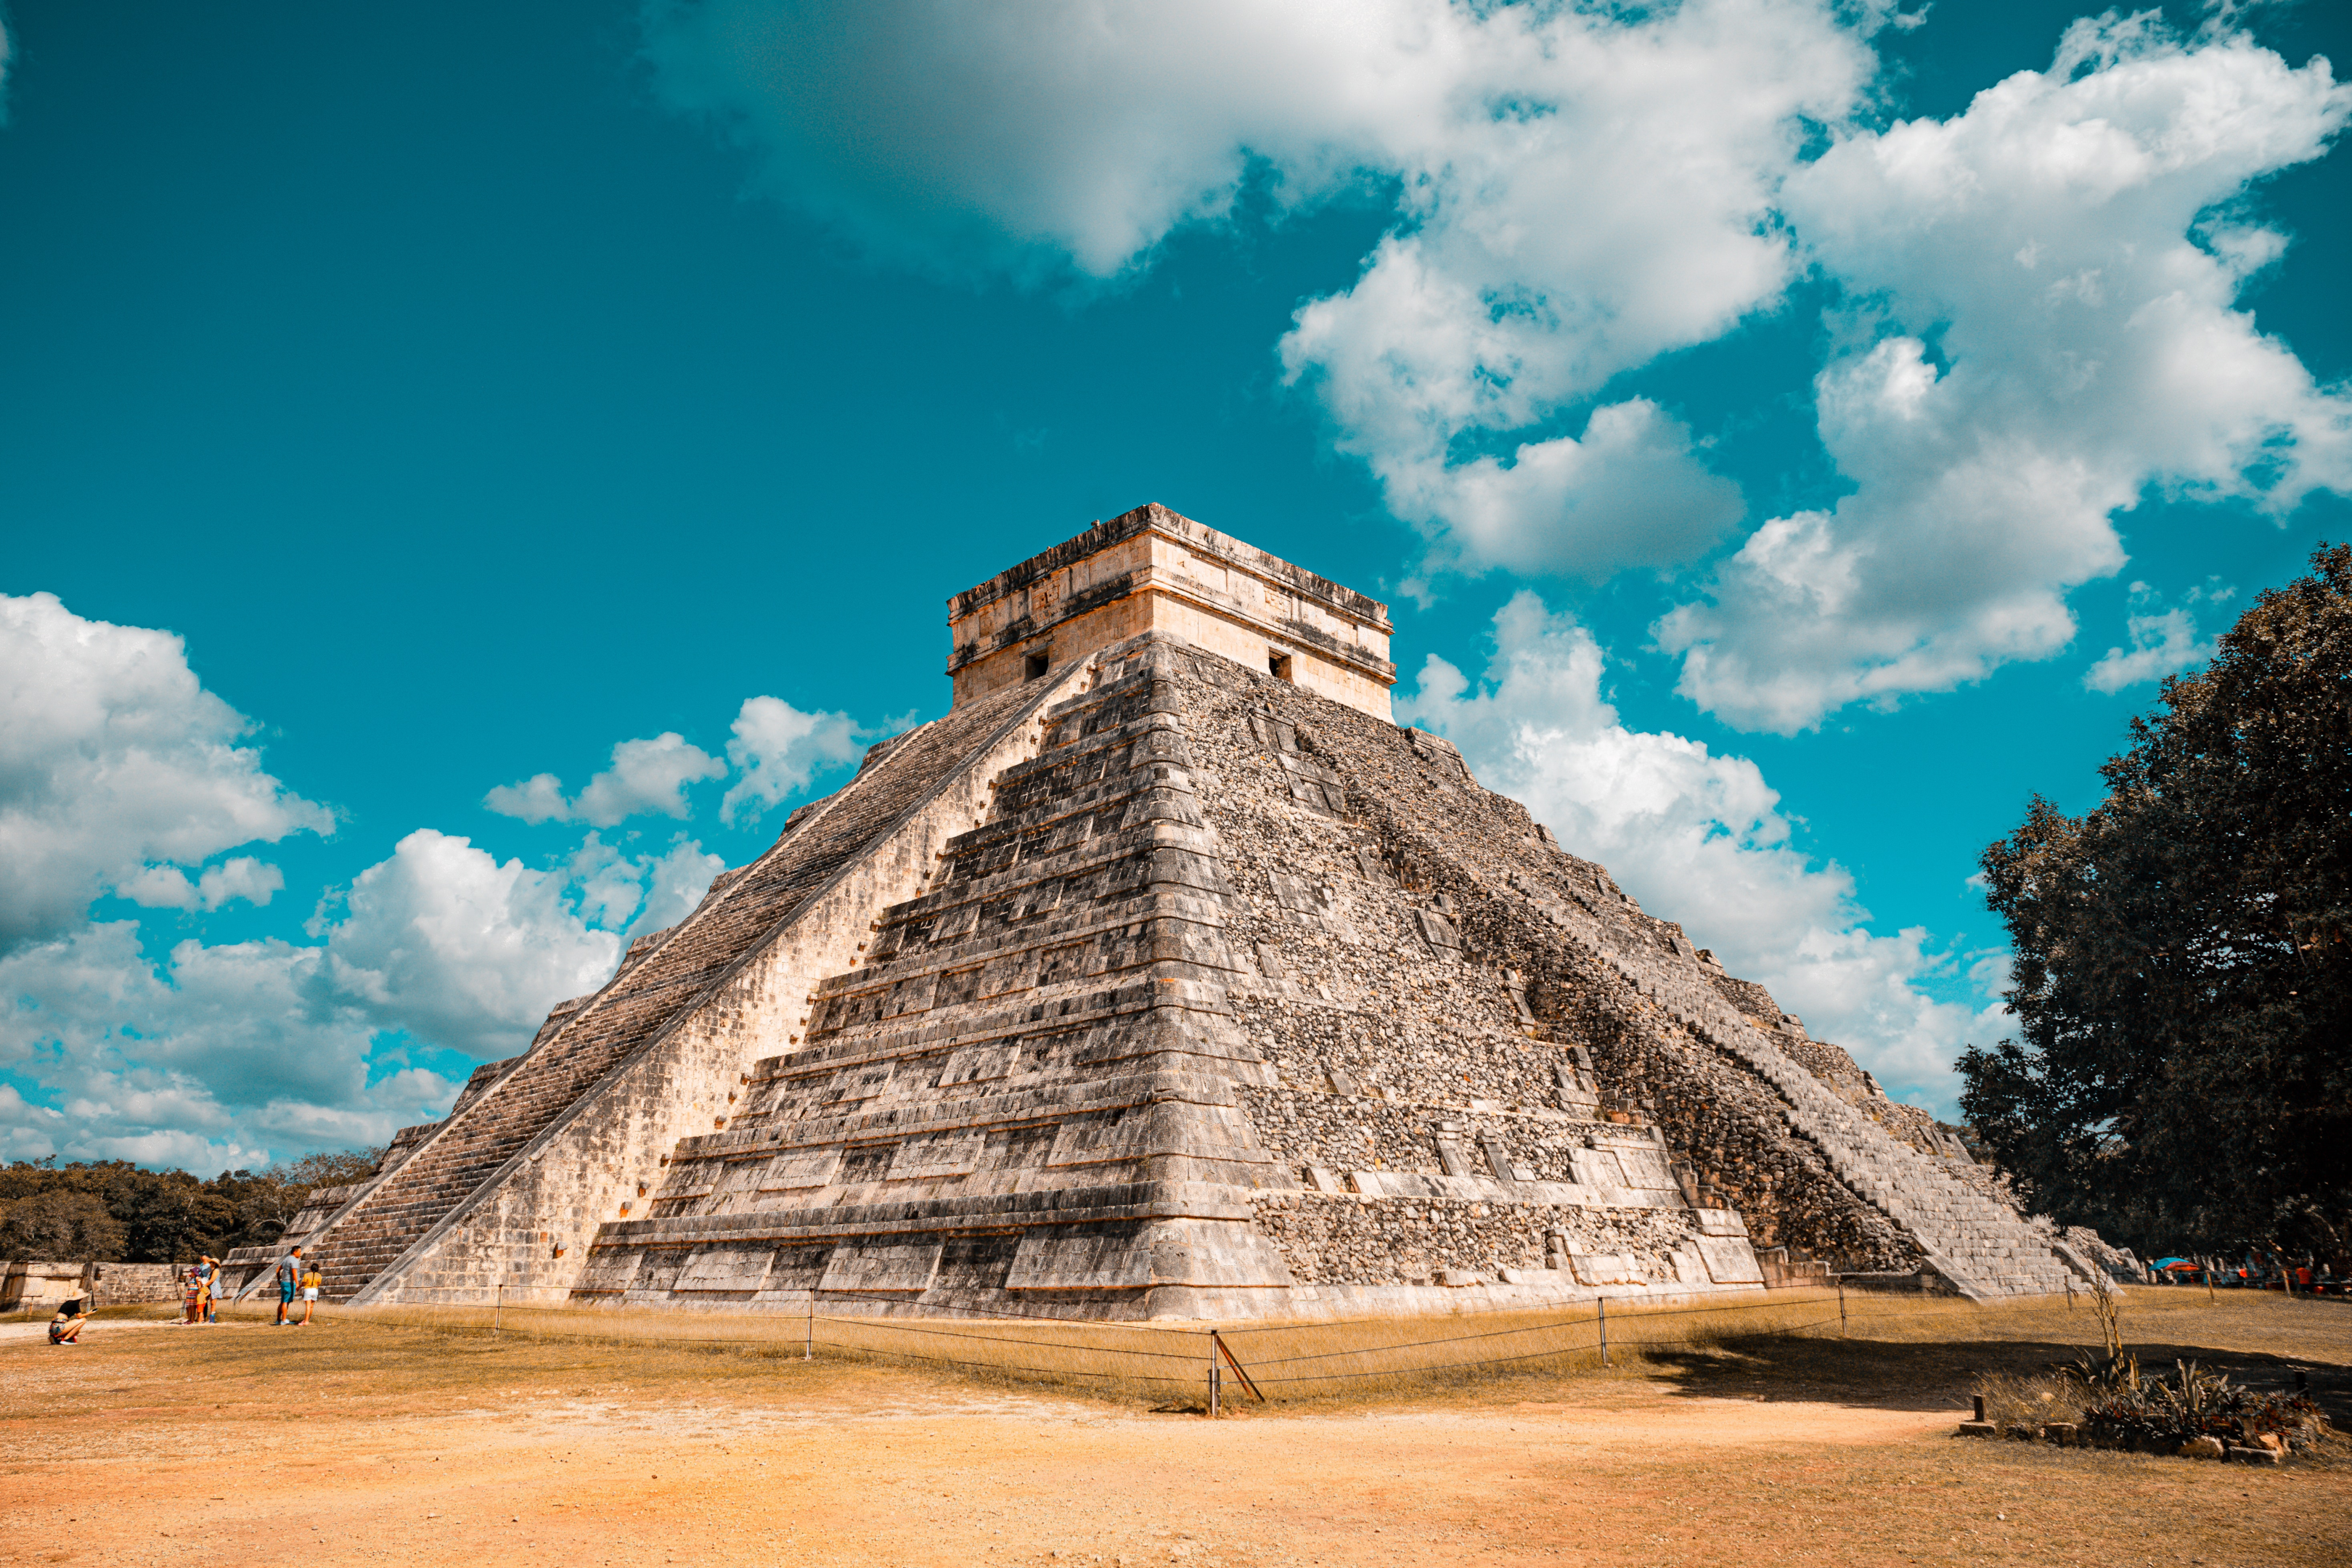 Mexico is known for its rich culture and incredible landmarks | Photo by Bhargava Marripati from Pexels